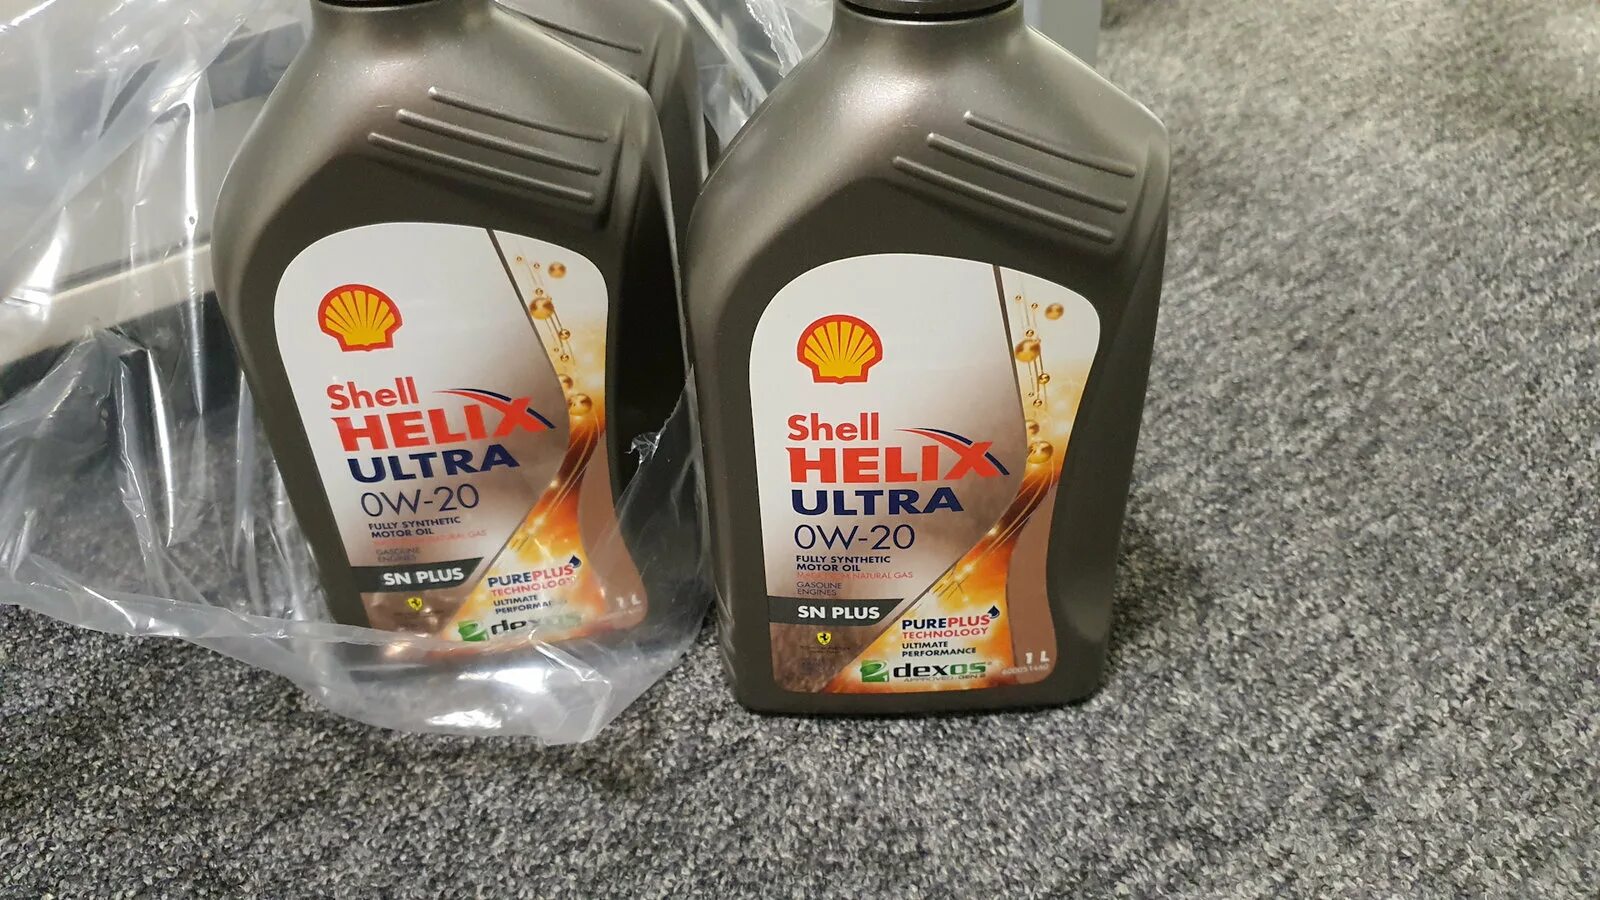 Тест масел 0w20. Shell Ultra 0w20. Shell Helix Ultra 0w20 SN. Моторное масло Shell Helix Ultra 0 w 20. Shell Helix Ultra 0w-20 API SN Plus.